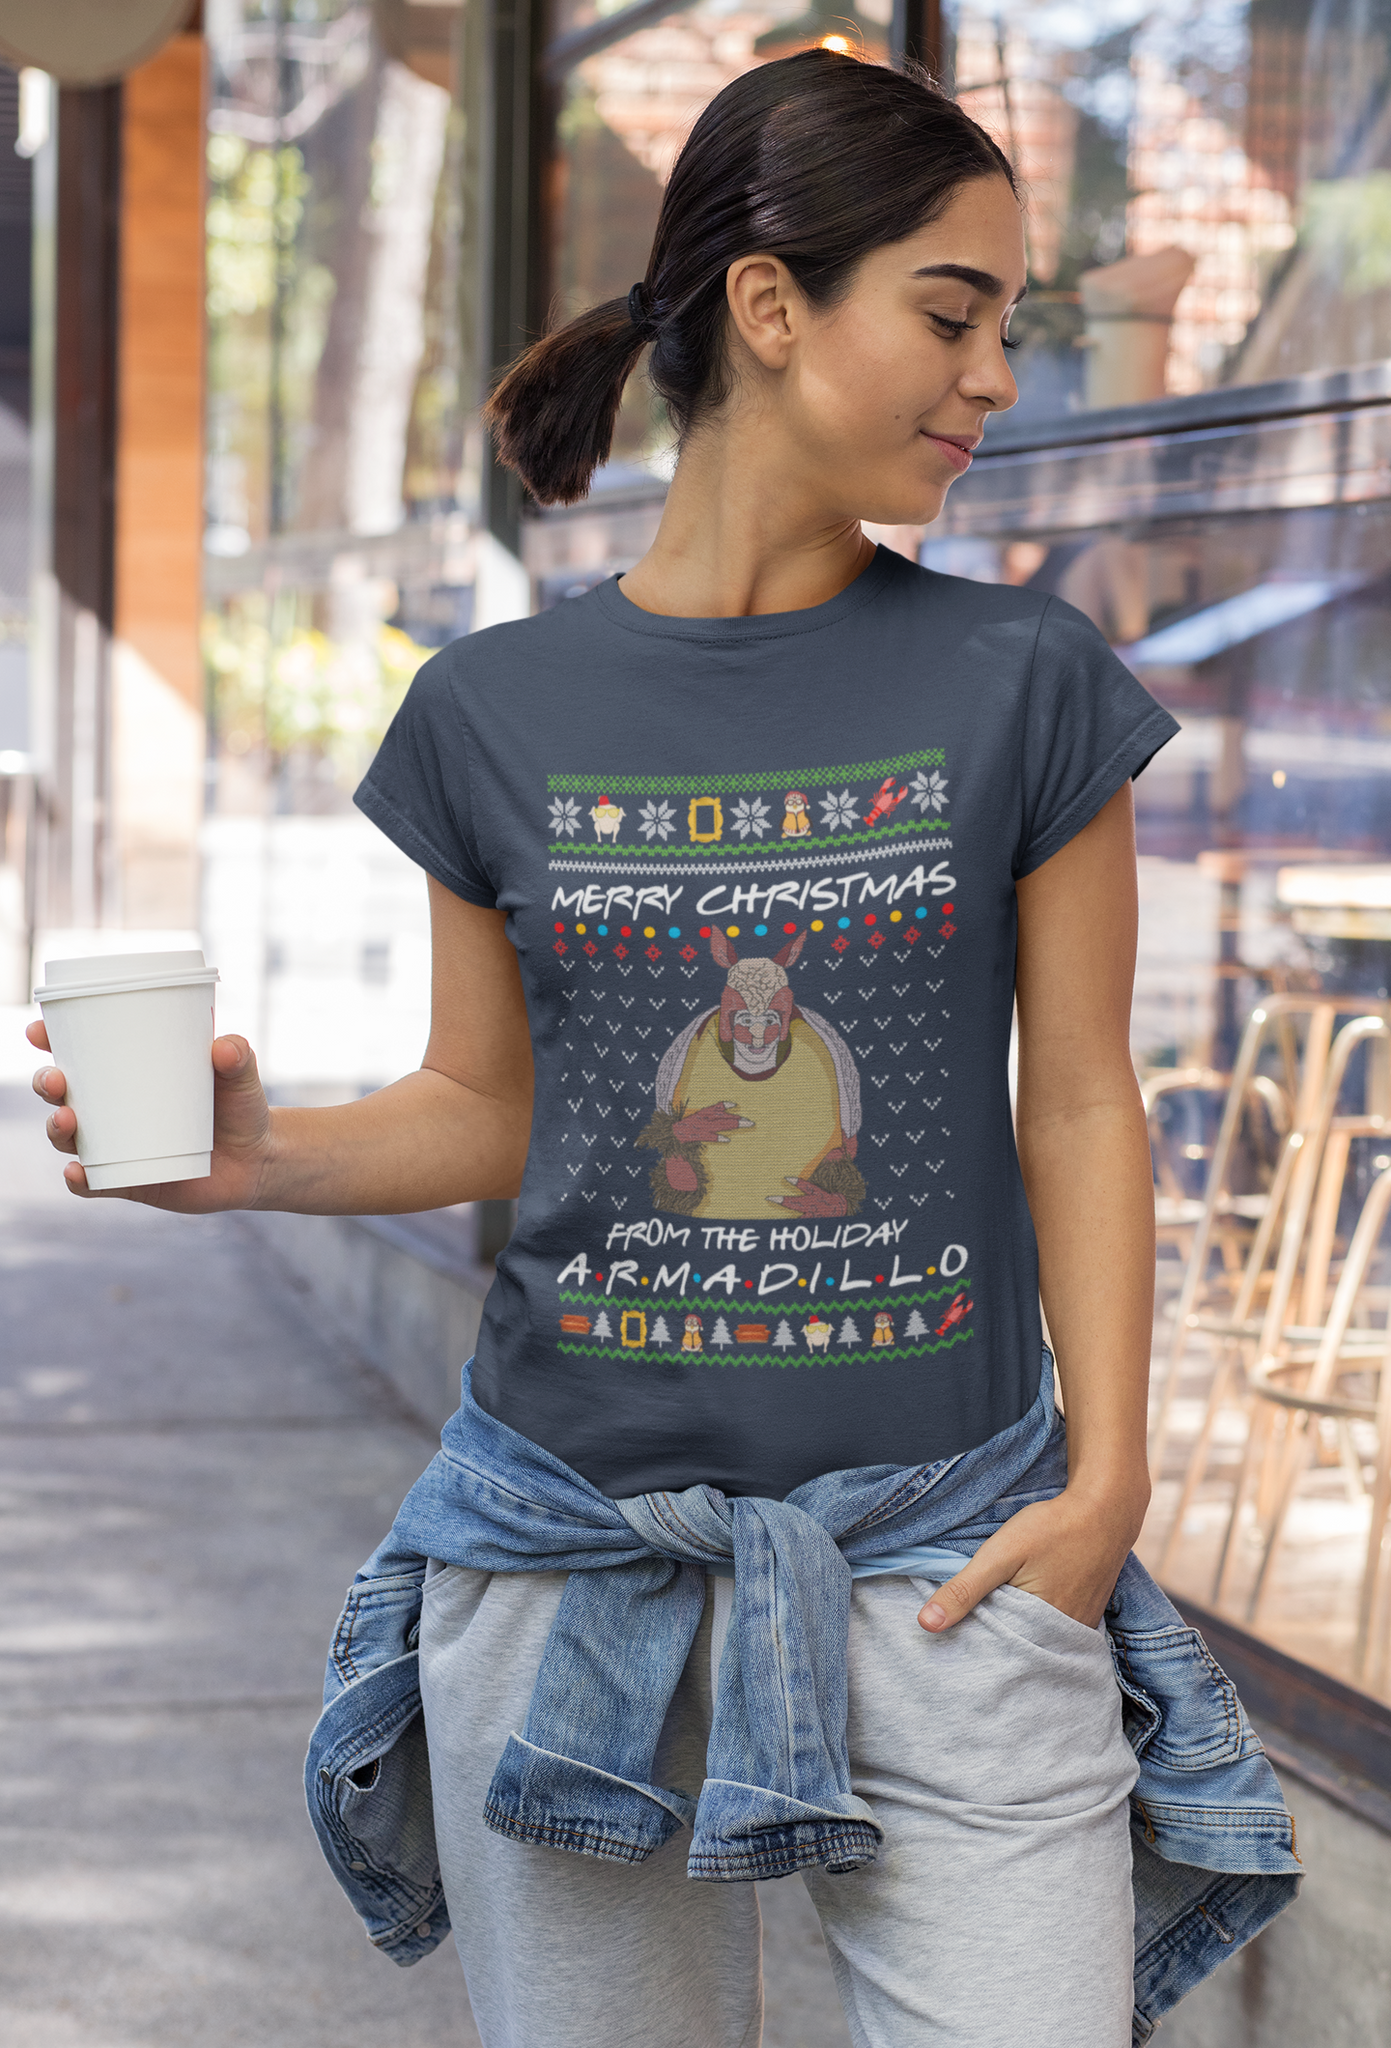 Friends TV Show Ugly Sweater Shirt, Ross Armadillo T Shirt, Merry Christmas The Holiday Armadillo Tshirt, Christmas Gifts